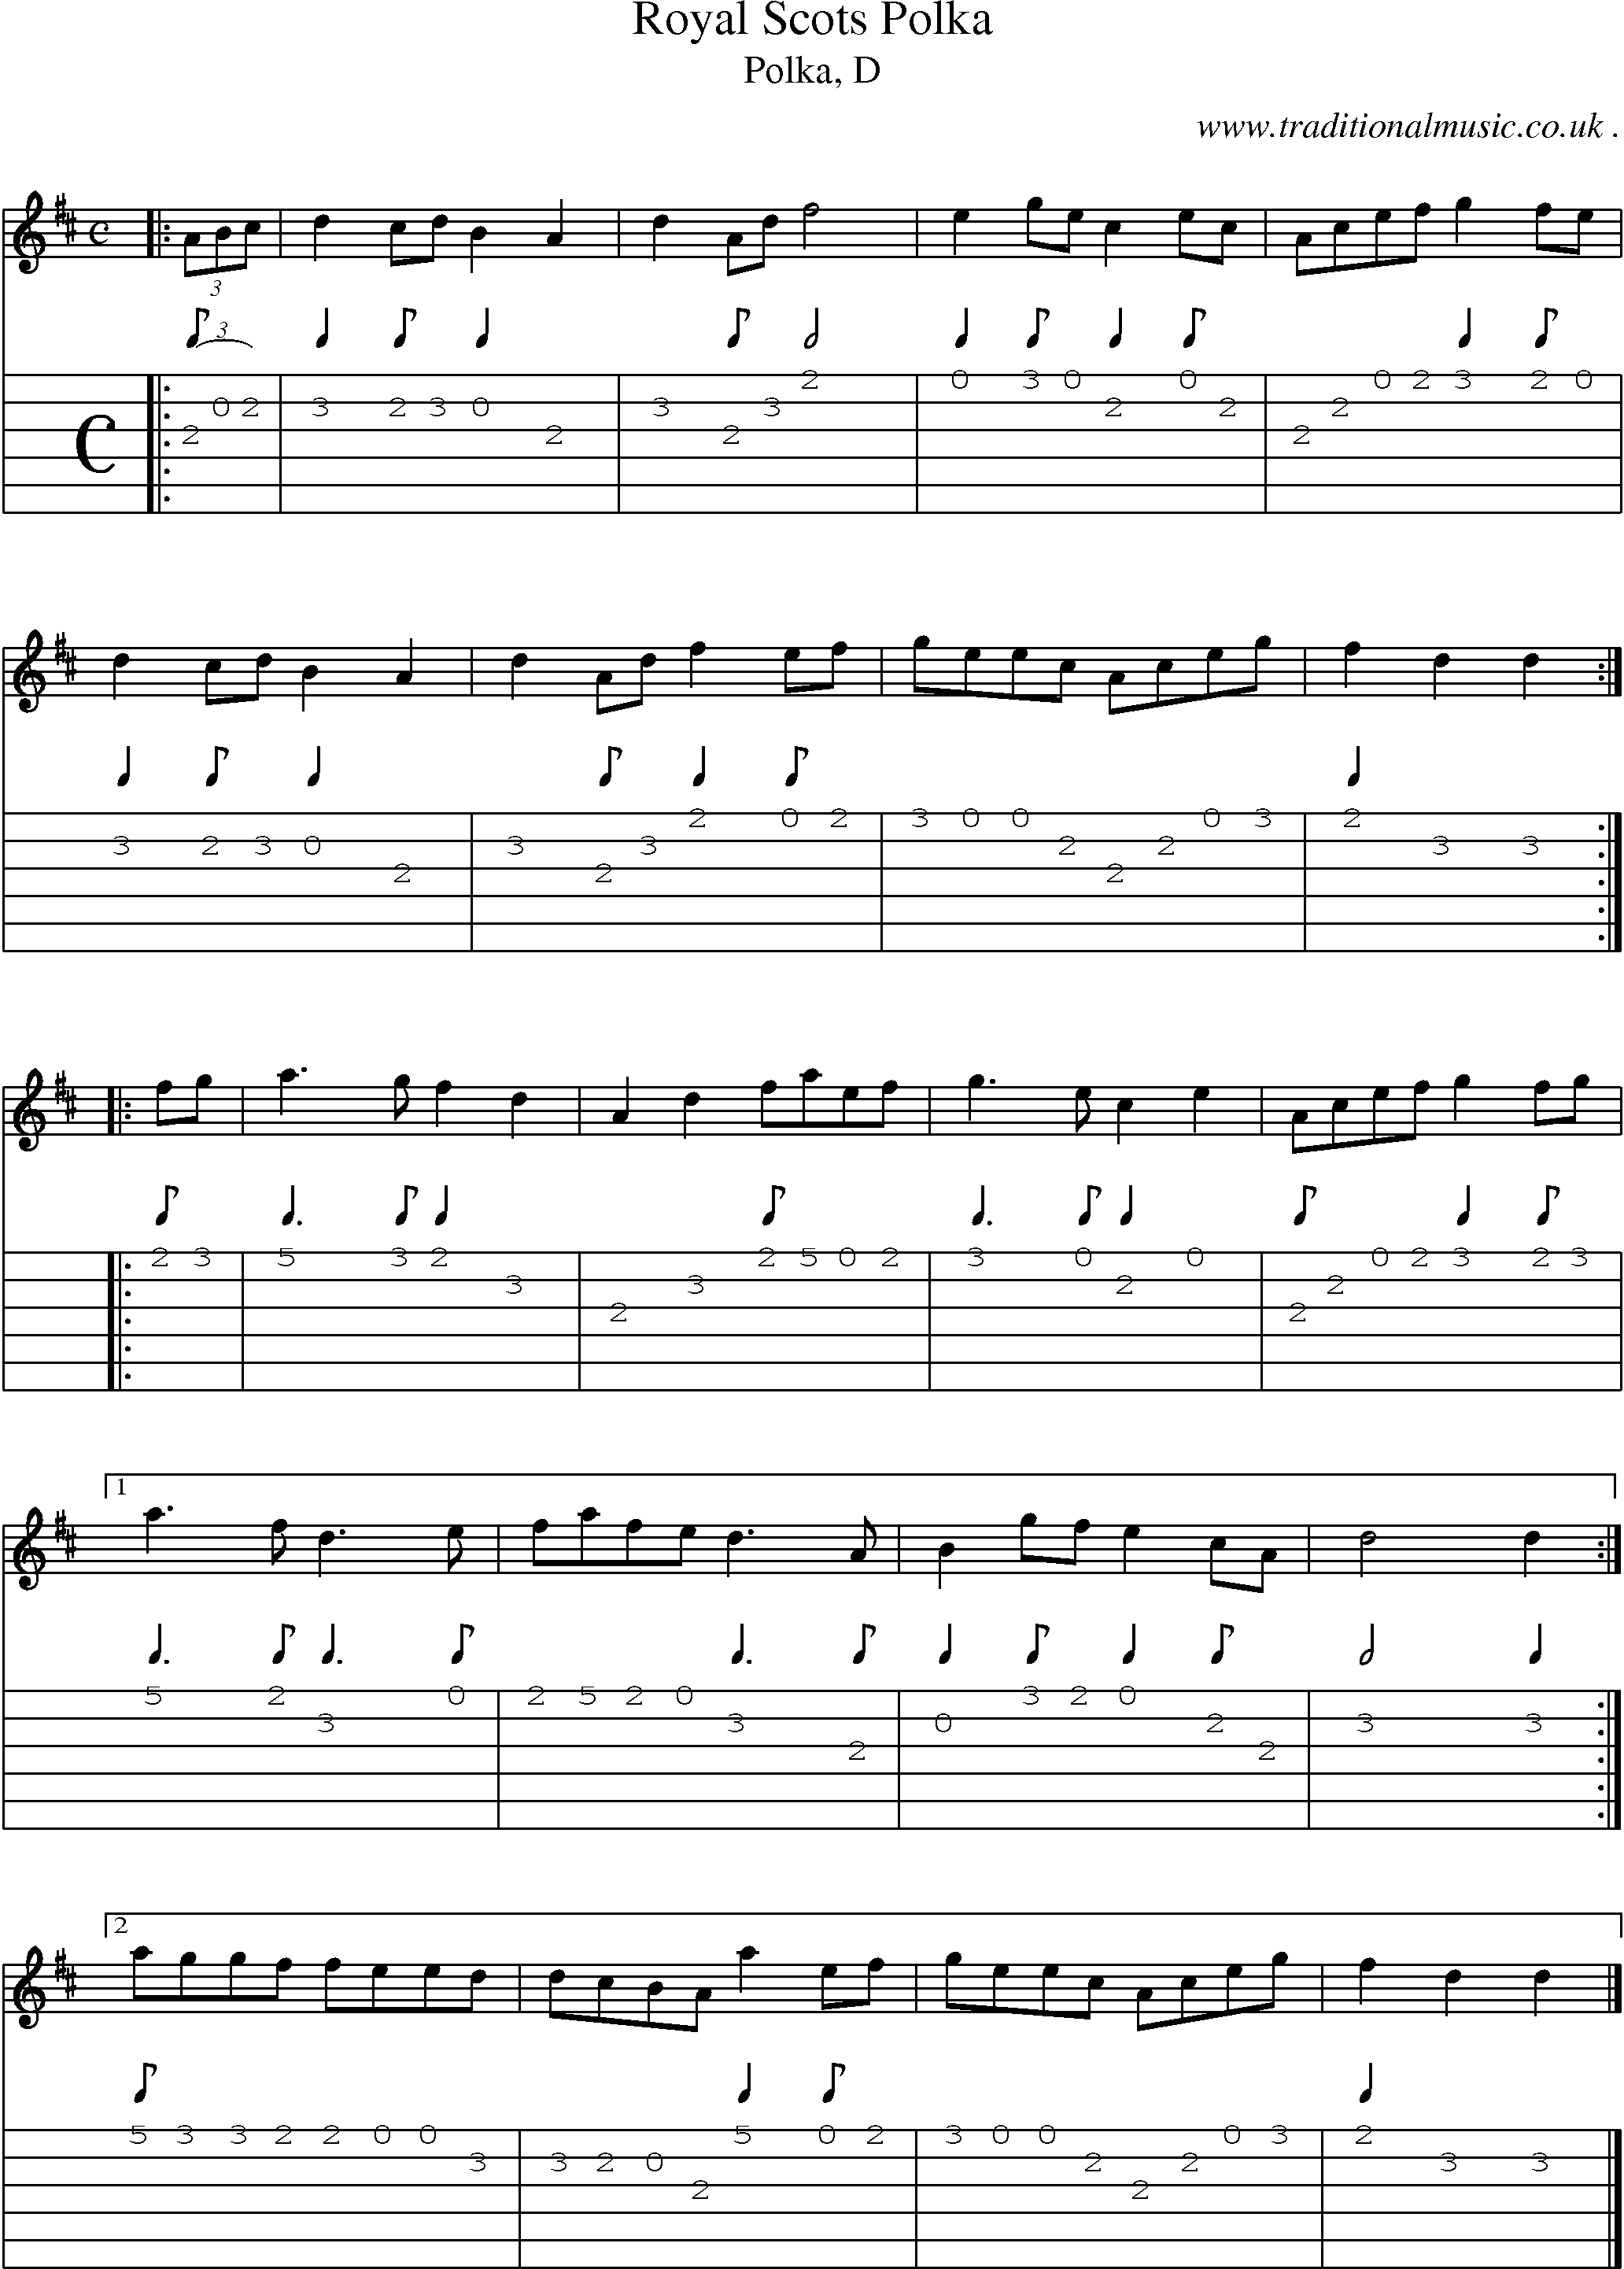 Sheet-music  score, Chords and Guitar Tabs for Royal Scots Polka